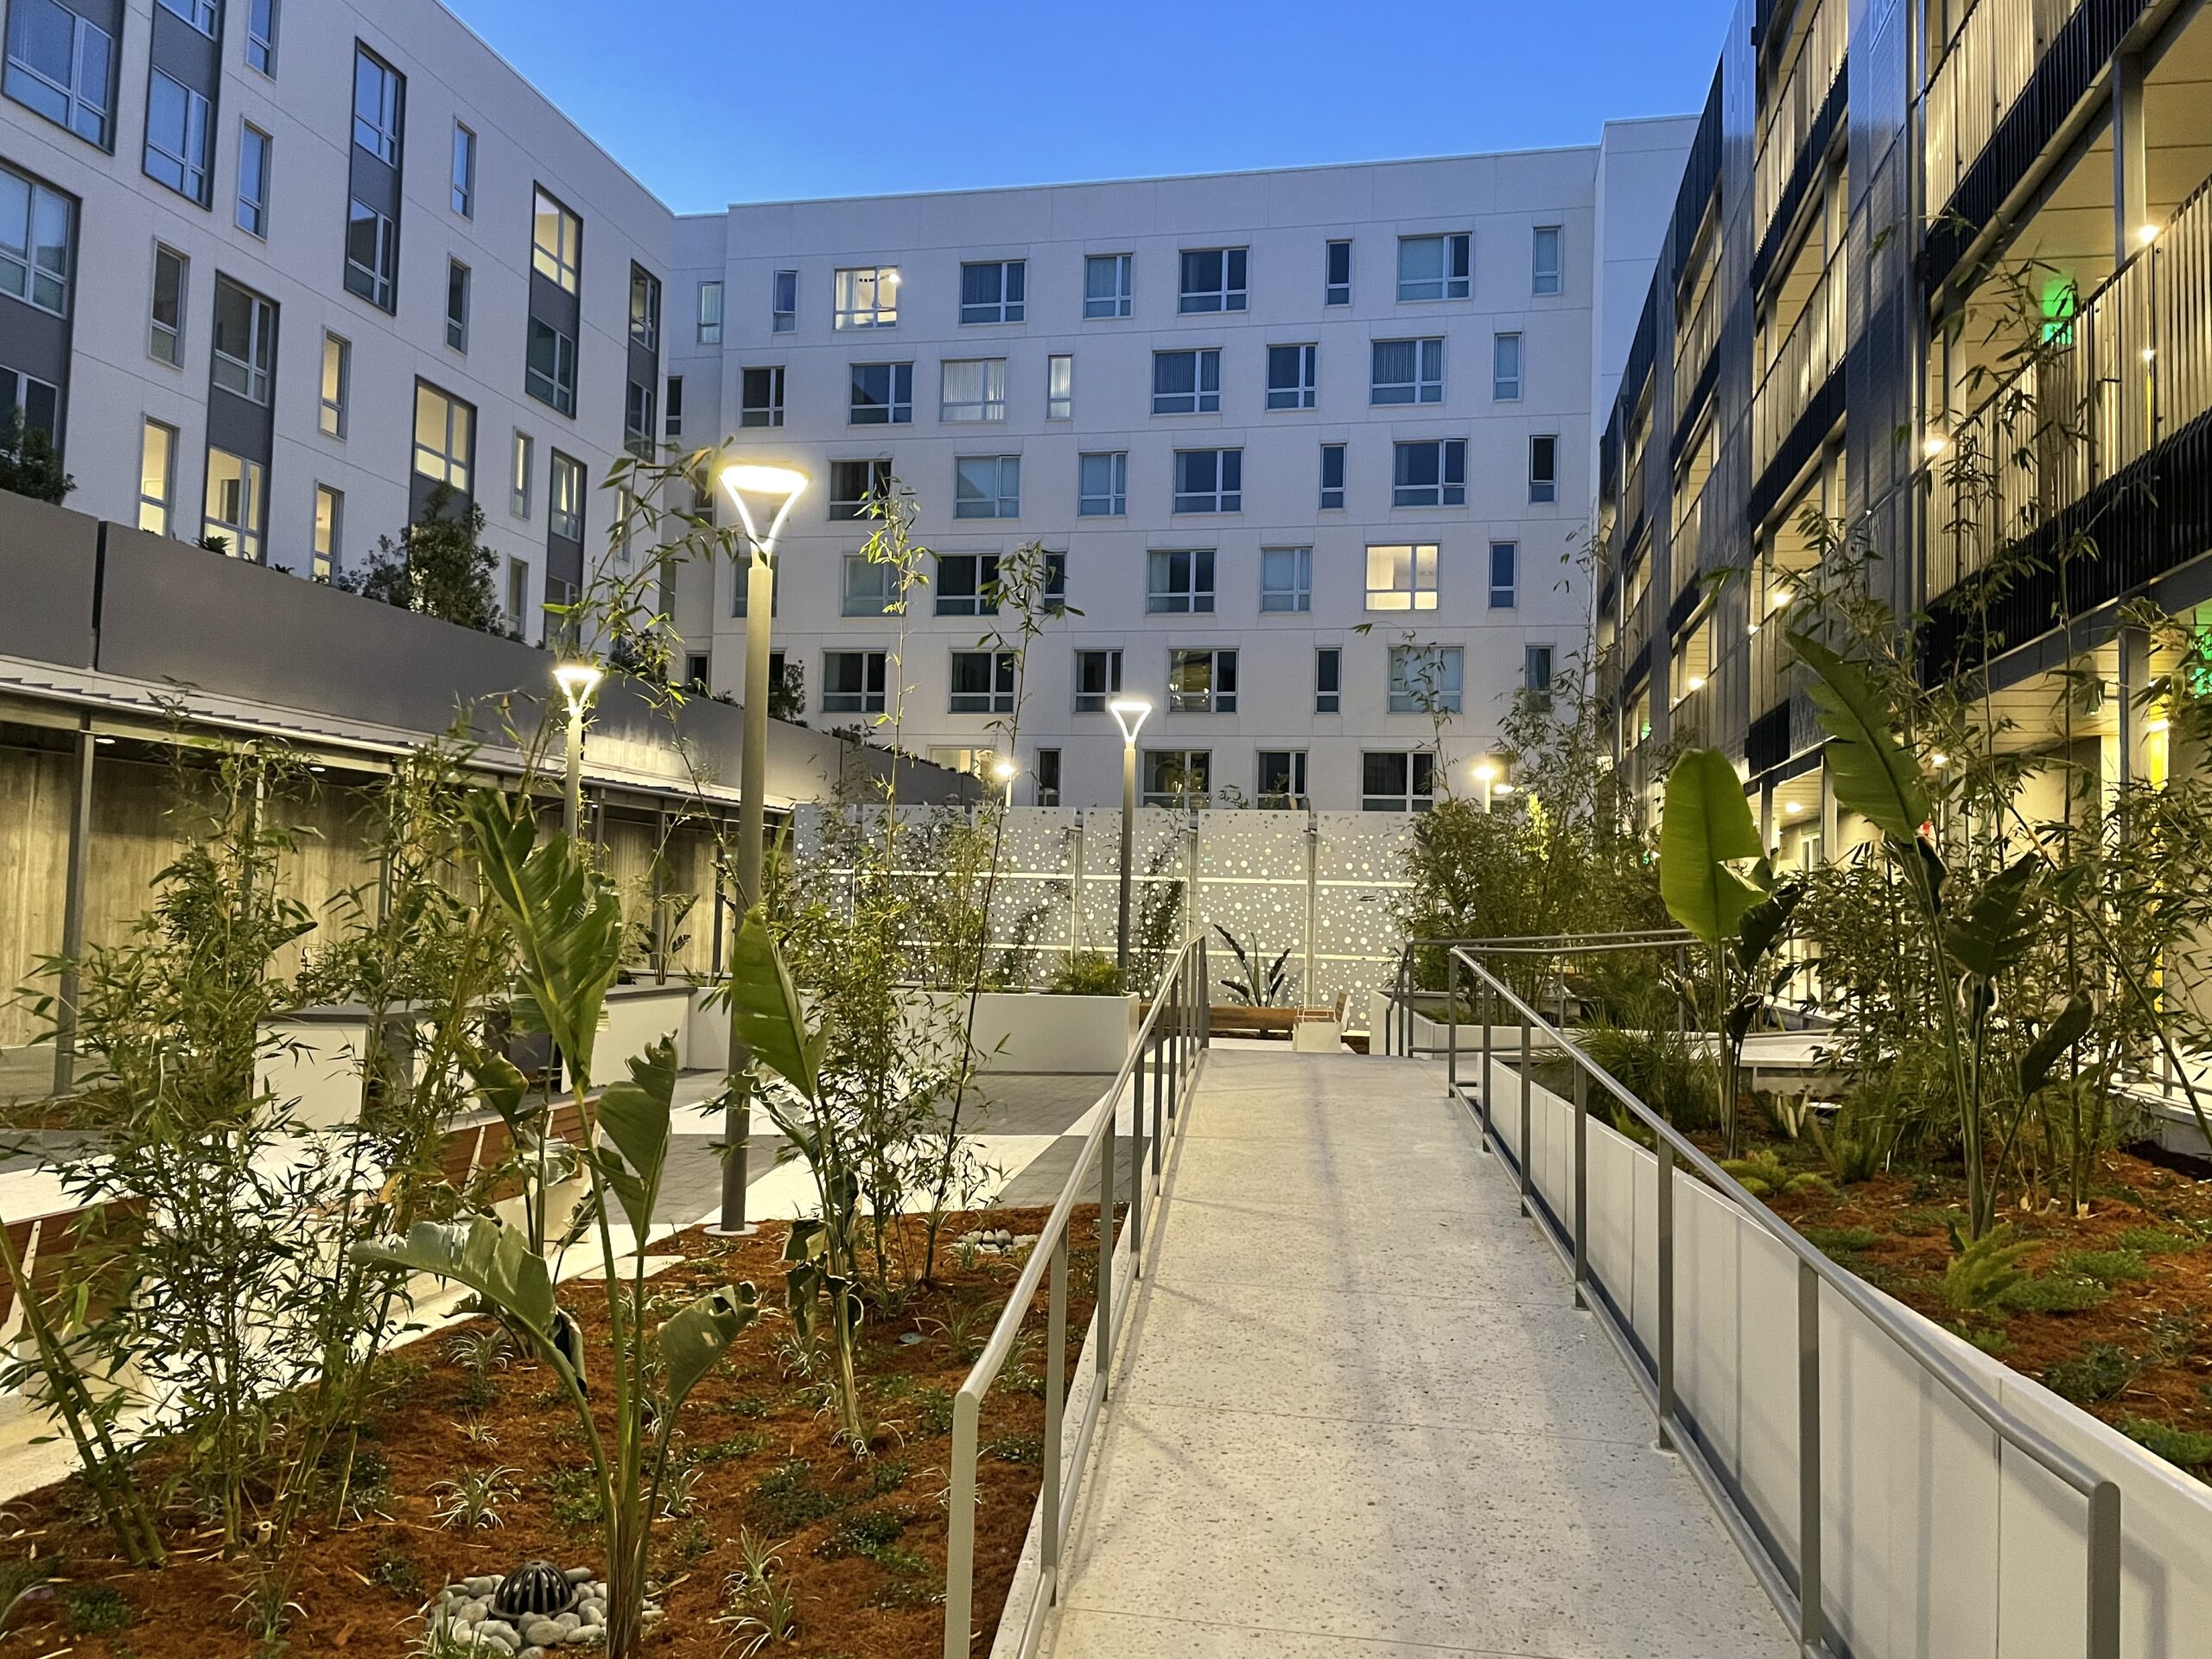 The courtyard is a daytime and evening hangout and event space for tenants, and connects the four residential wings of the complex. Sister Lillian Murphy Community, Mission Bay. San Francisco, California © Karl Vinge